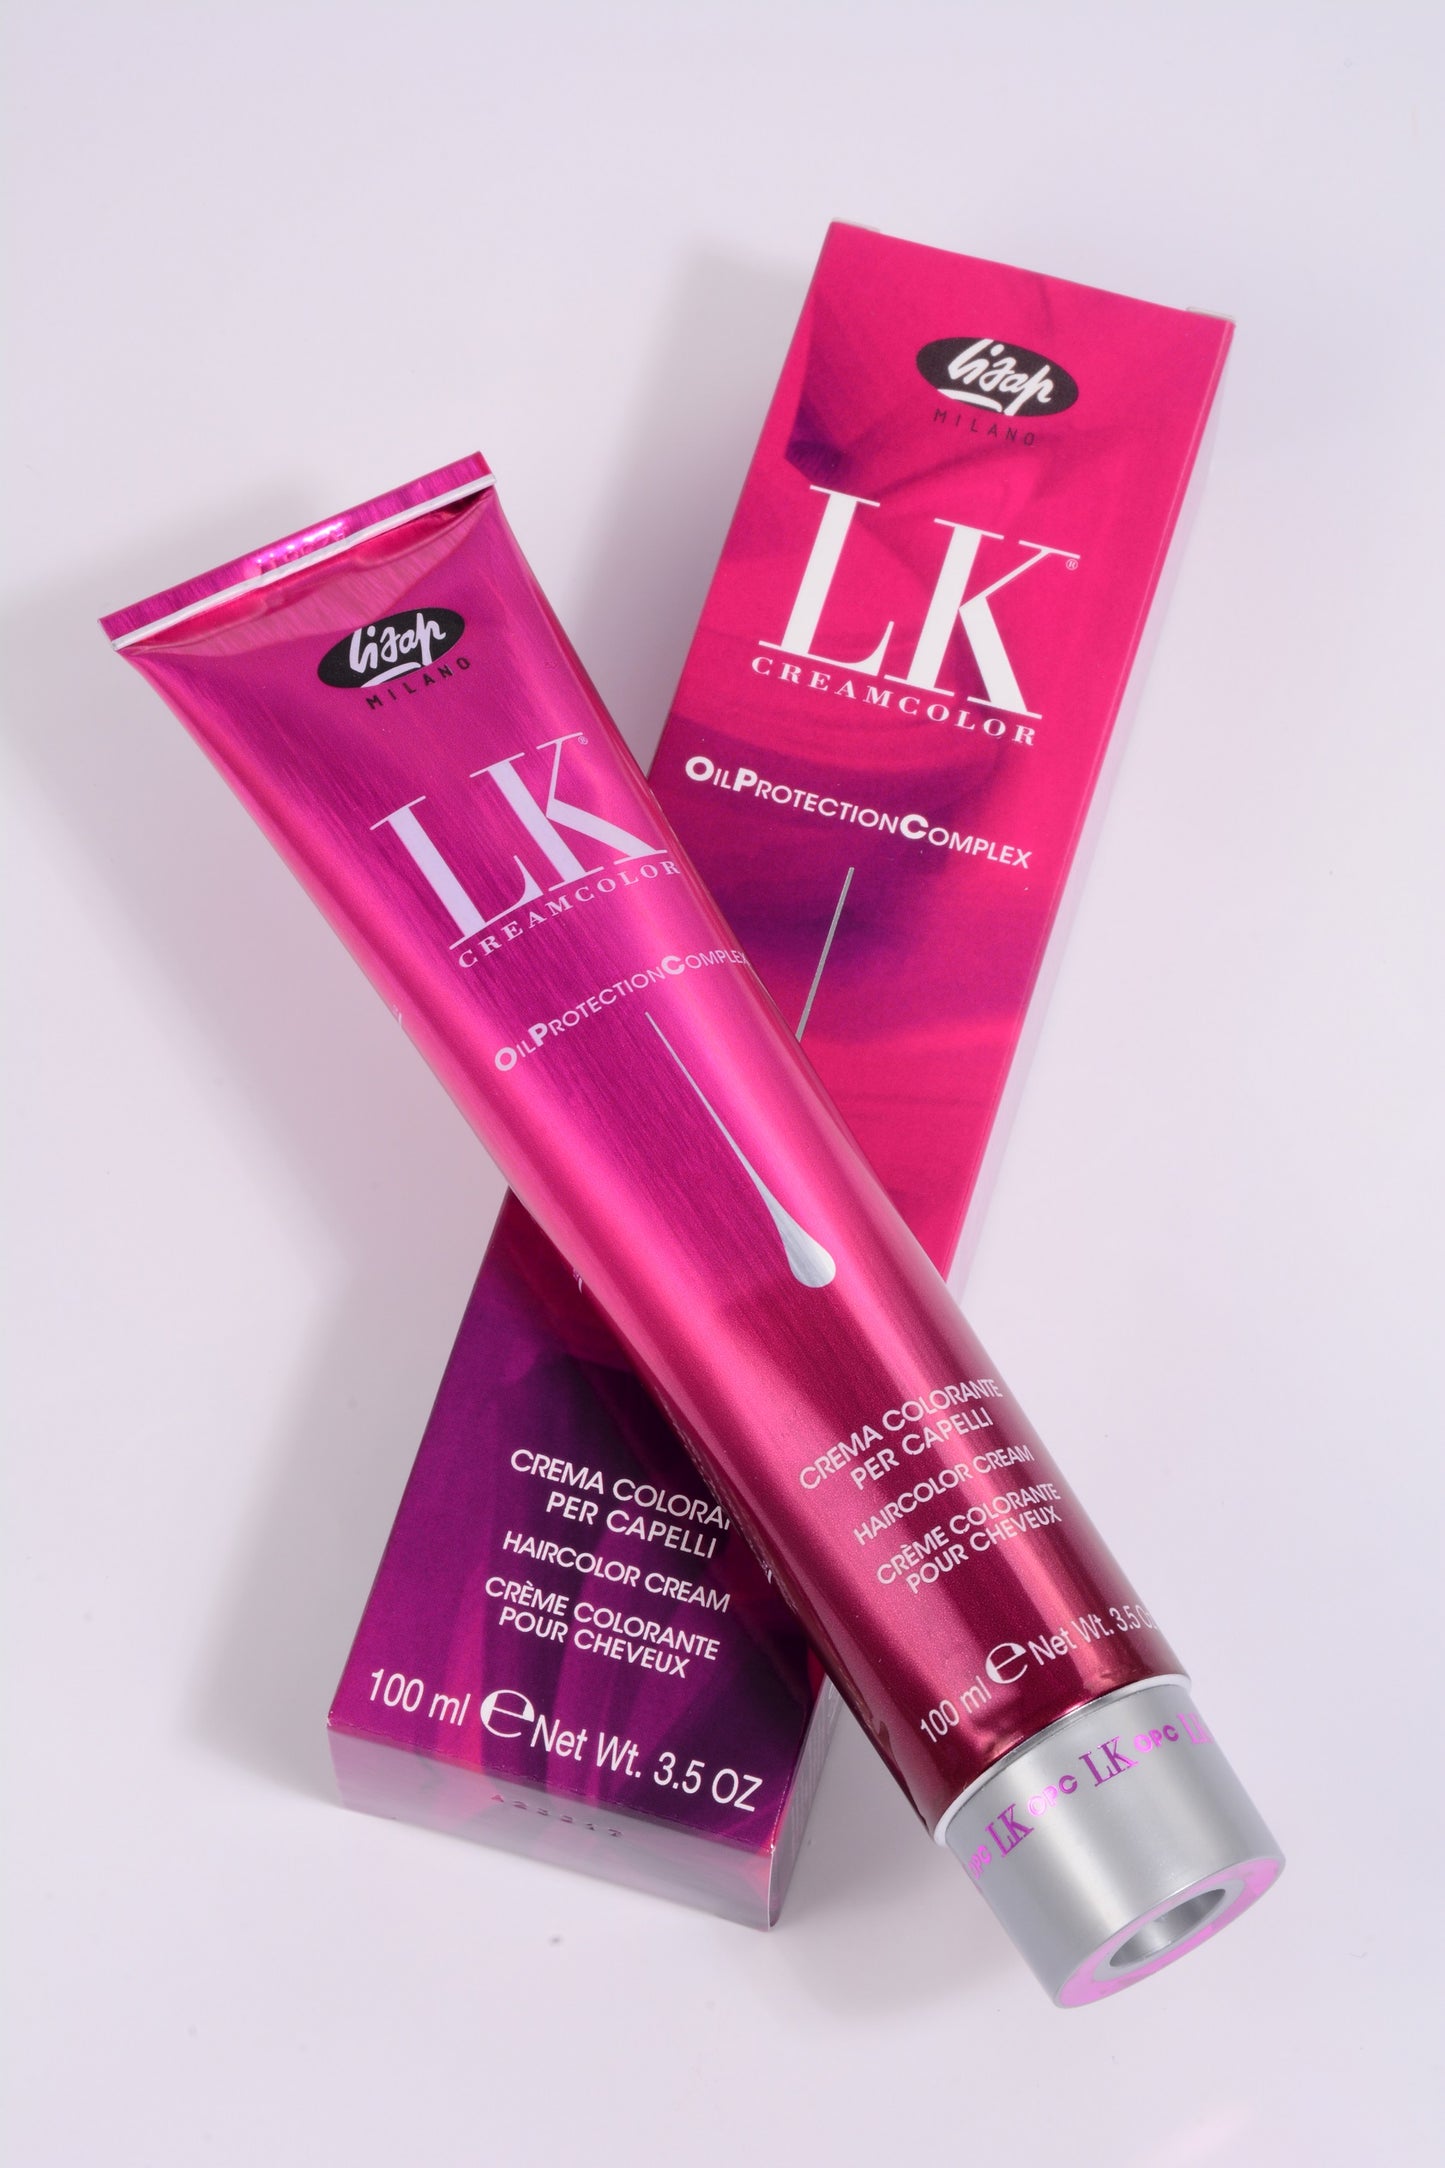 LK Creamcolor 5/28 Oil Protection Complex